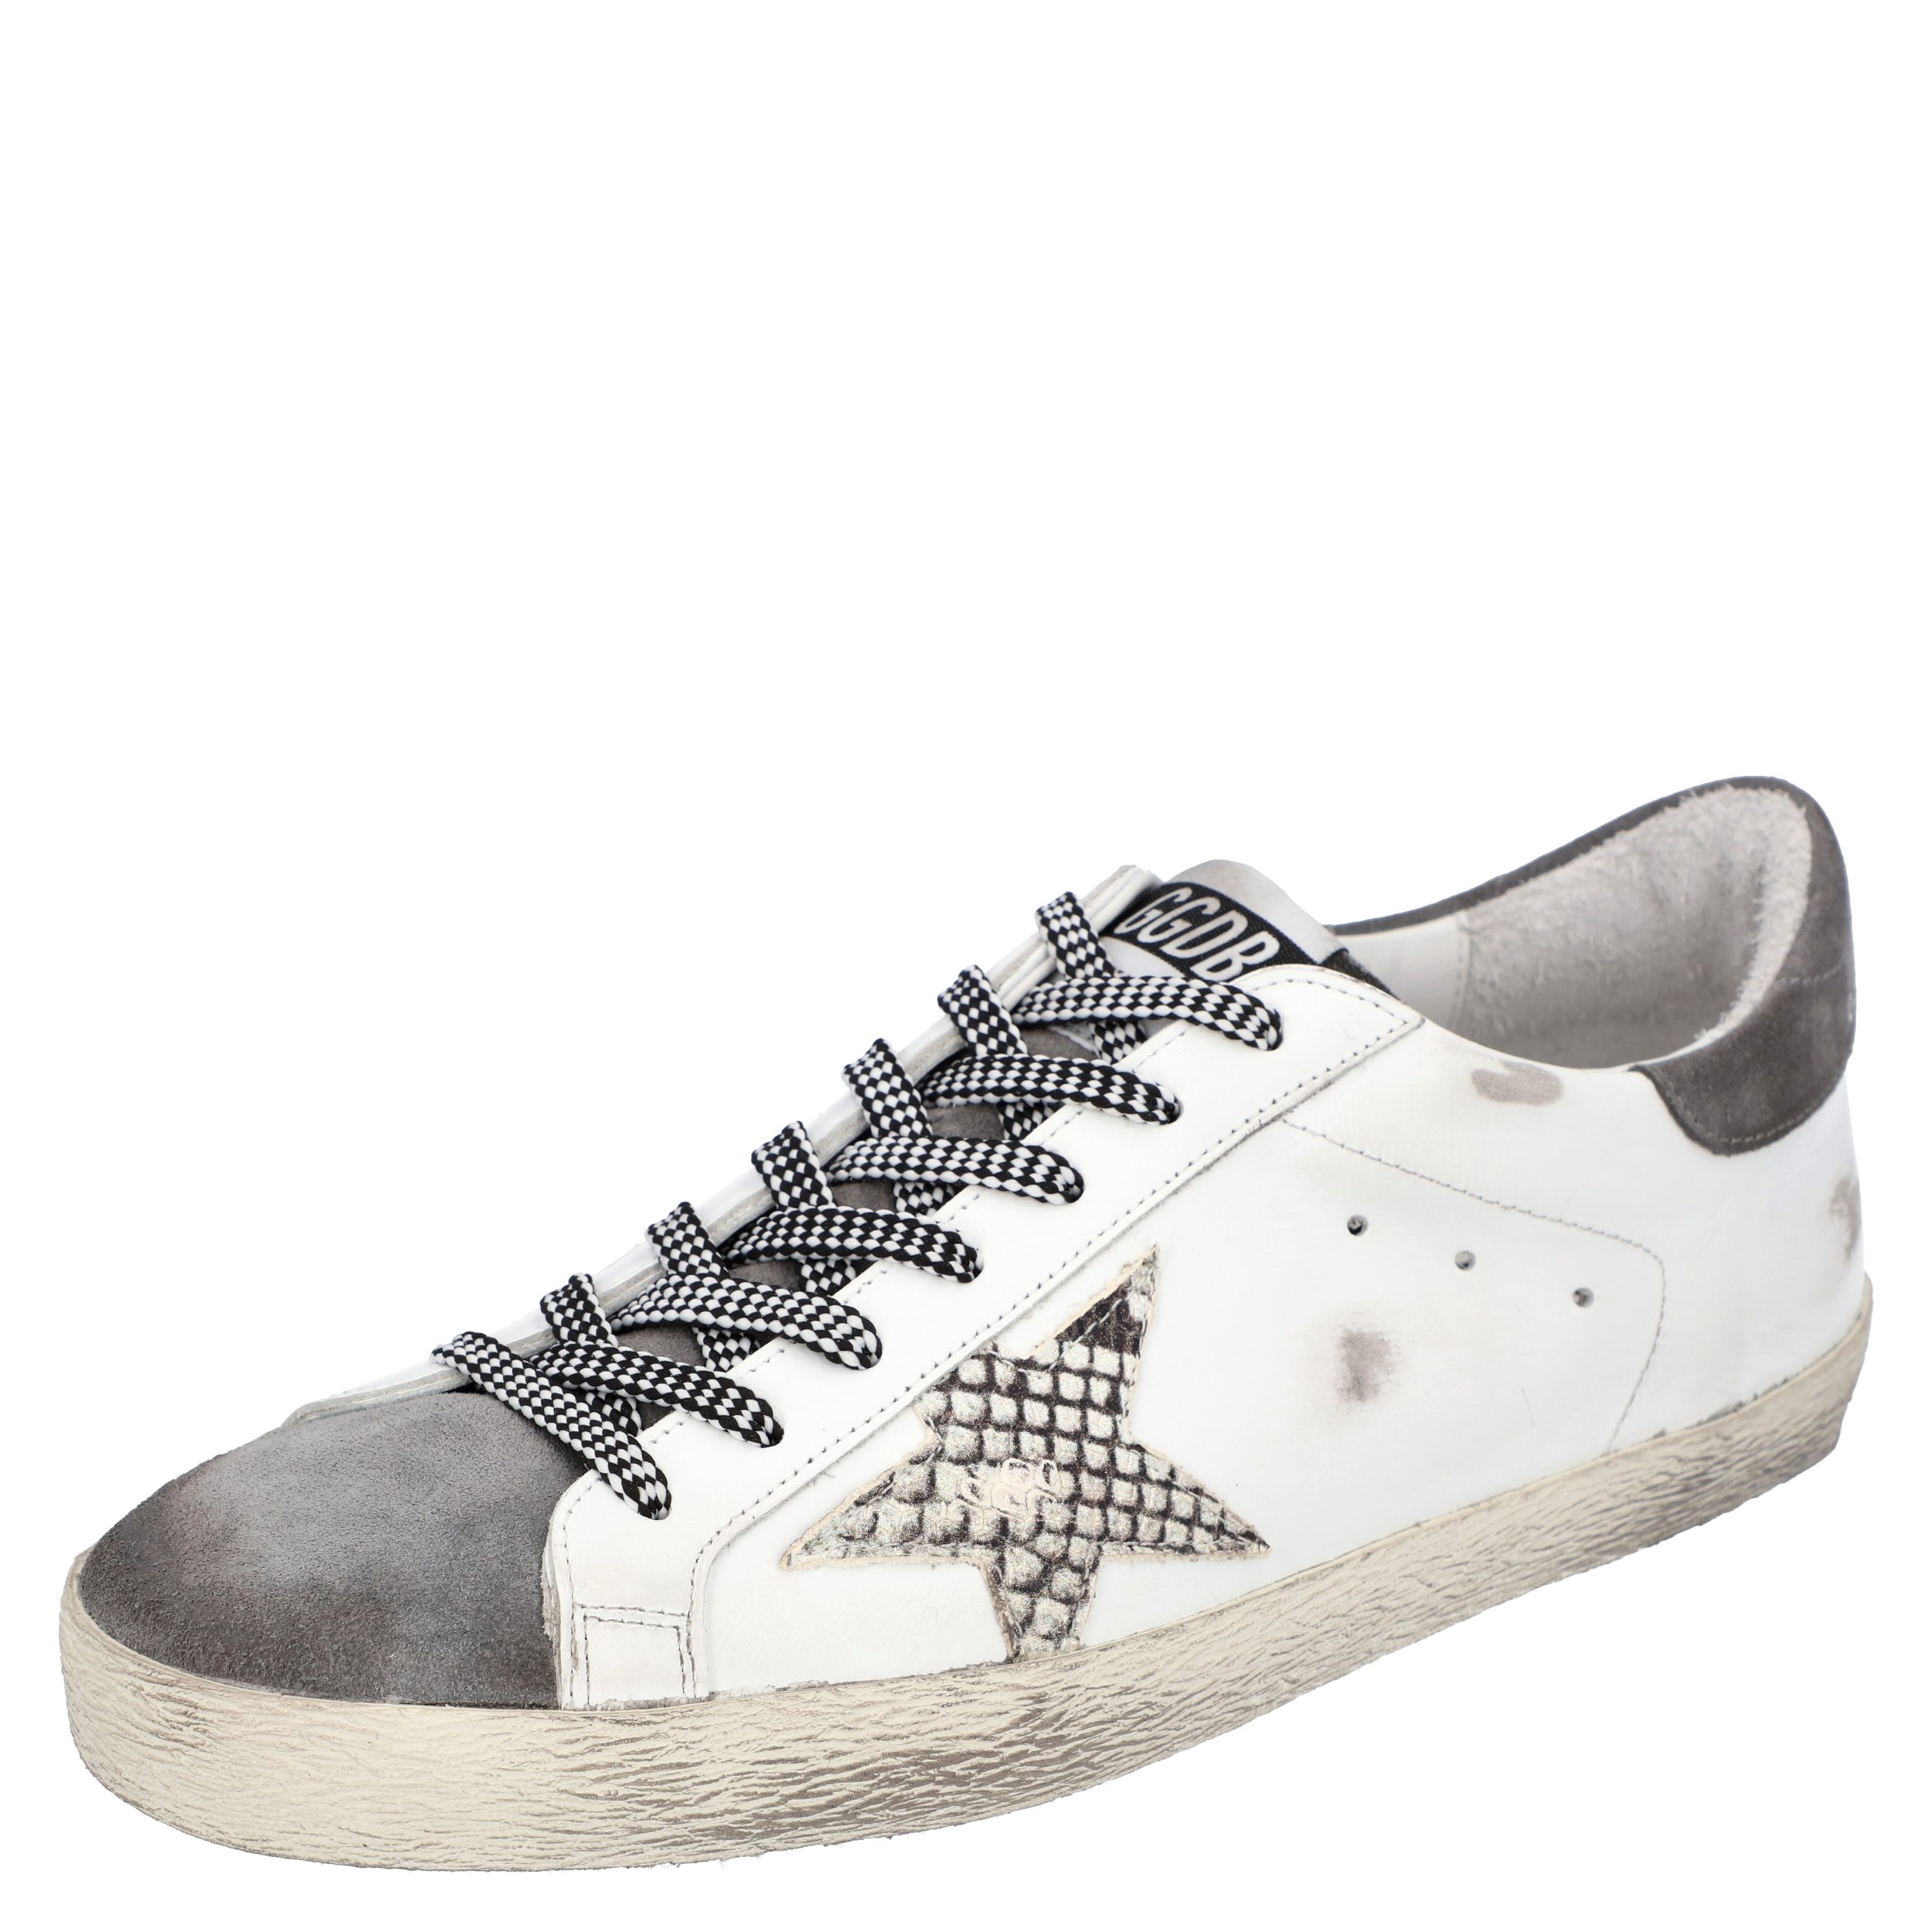 Golden Goose White/Grey Leather Superstar Sneakers Size EU 45